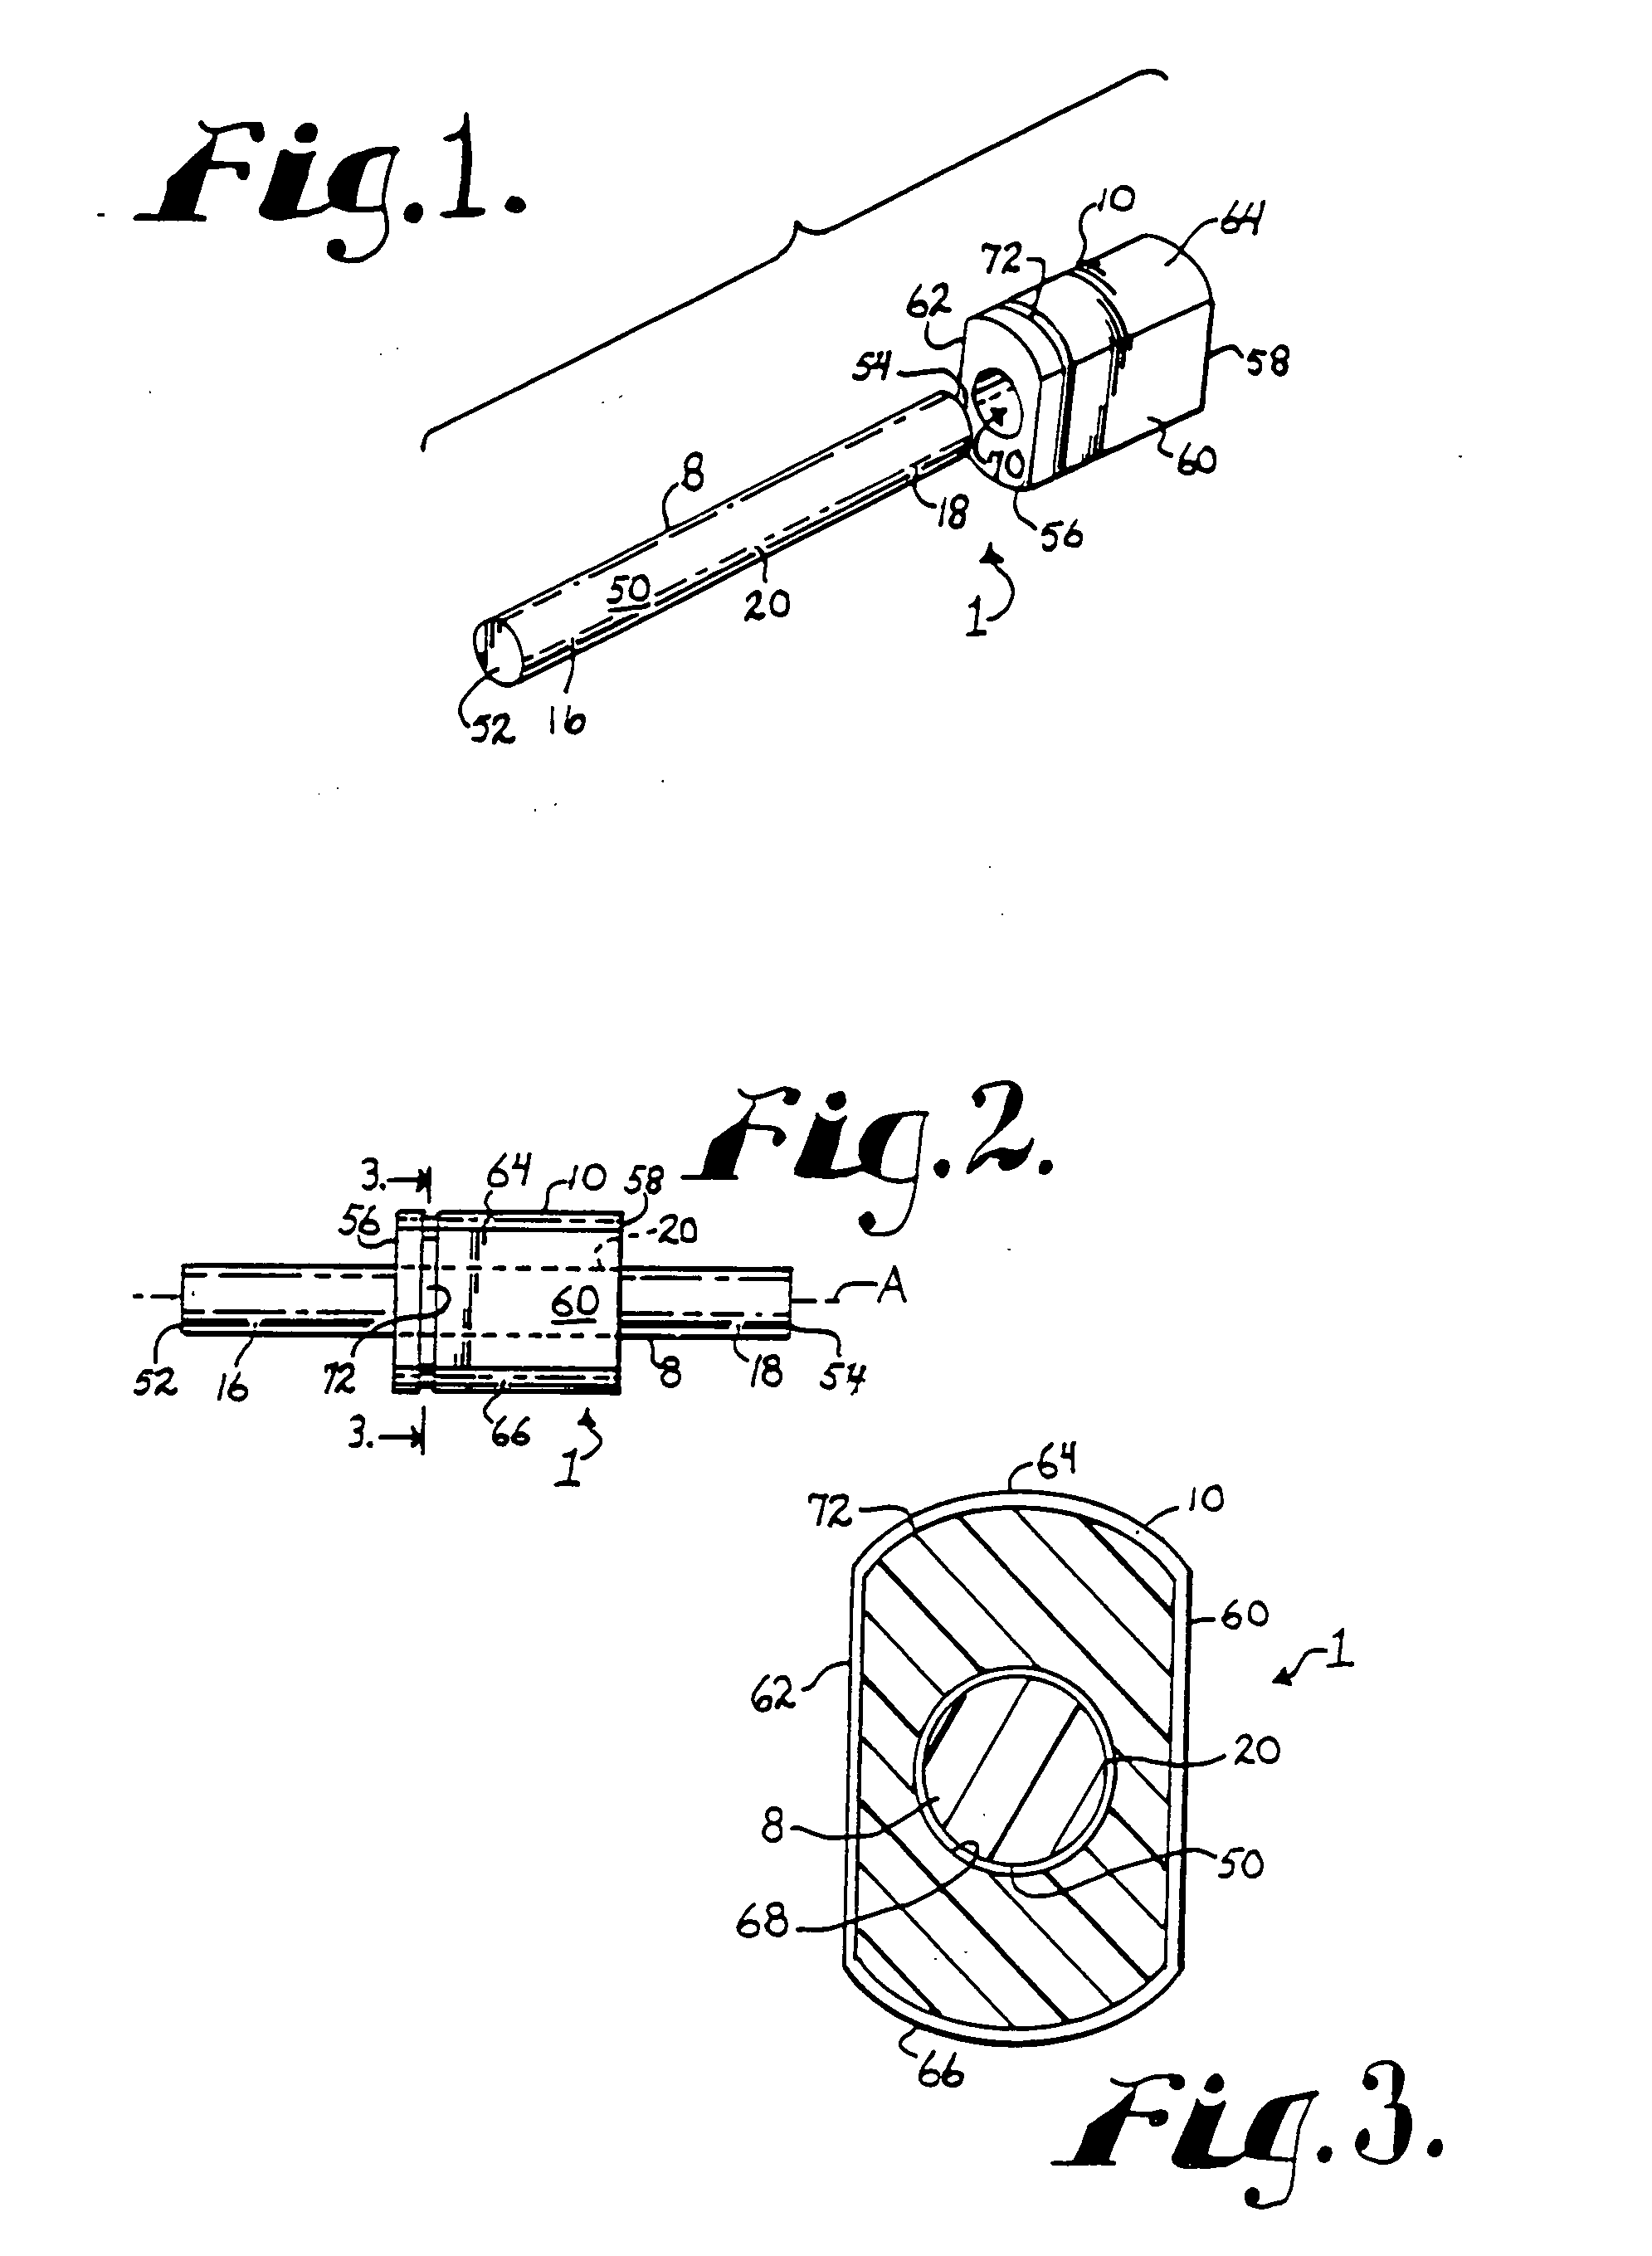 Dynamic stabilization connecting member with elastic core and outer sleeve